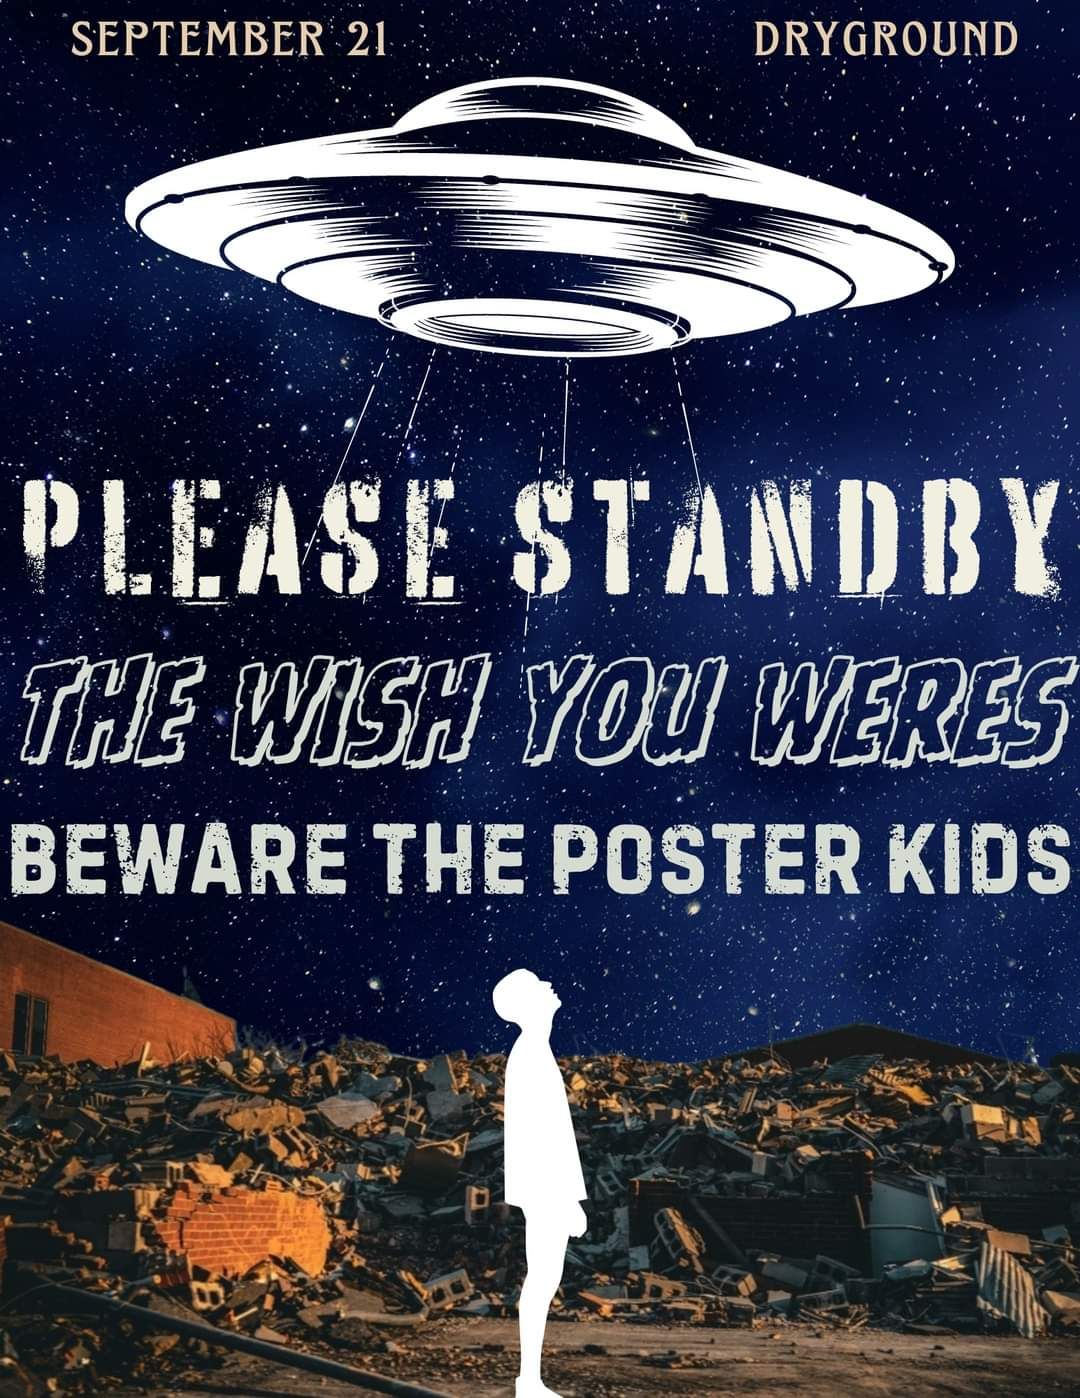 09\/21 - Please Standby | The Wish You Weres | Beware The Poster Kids @ Dry Grounds